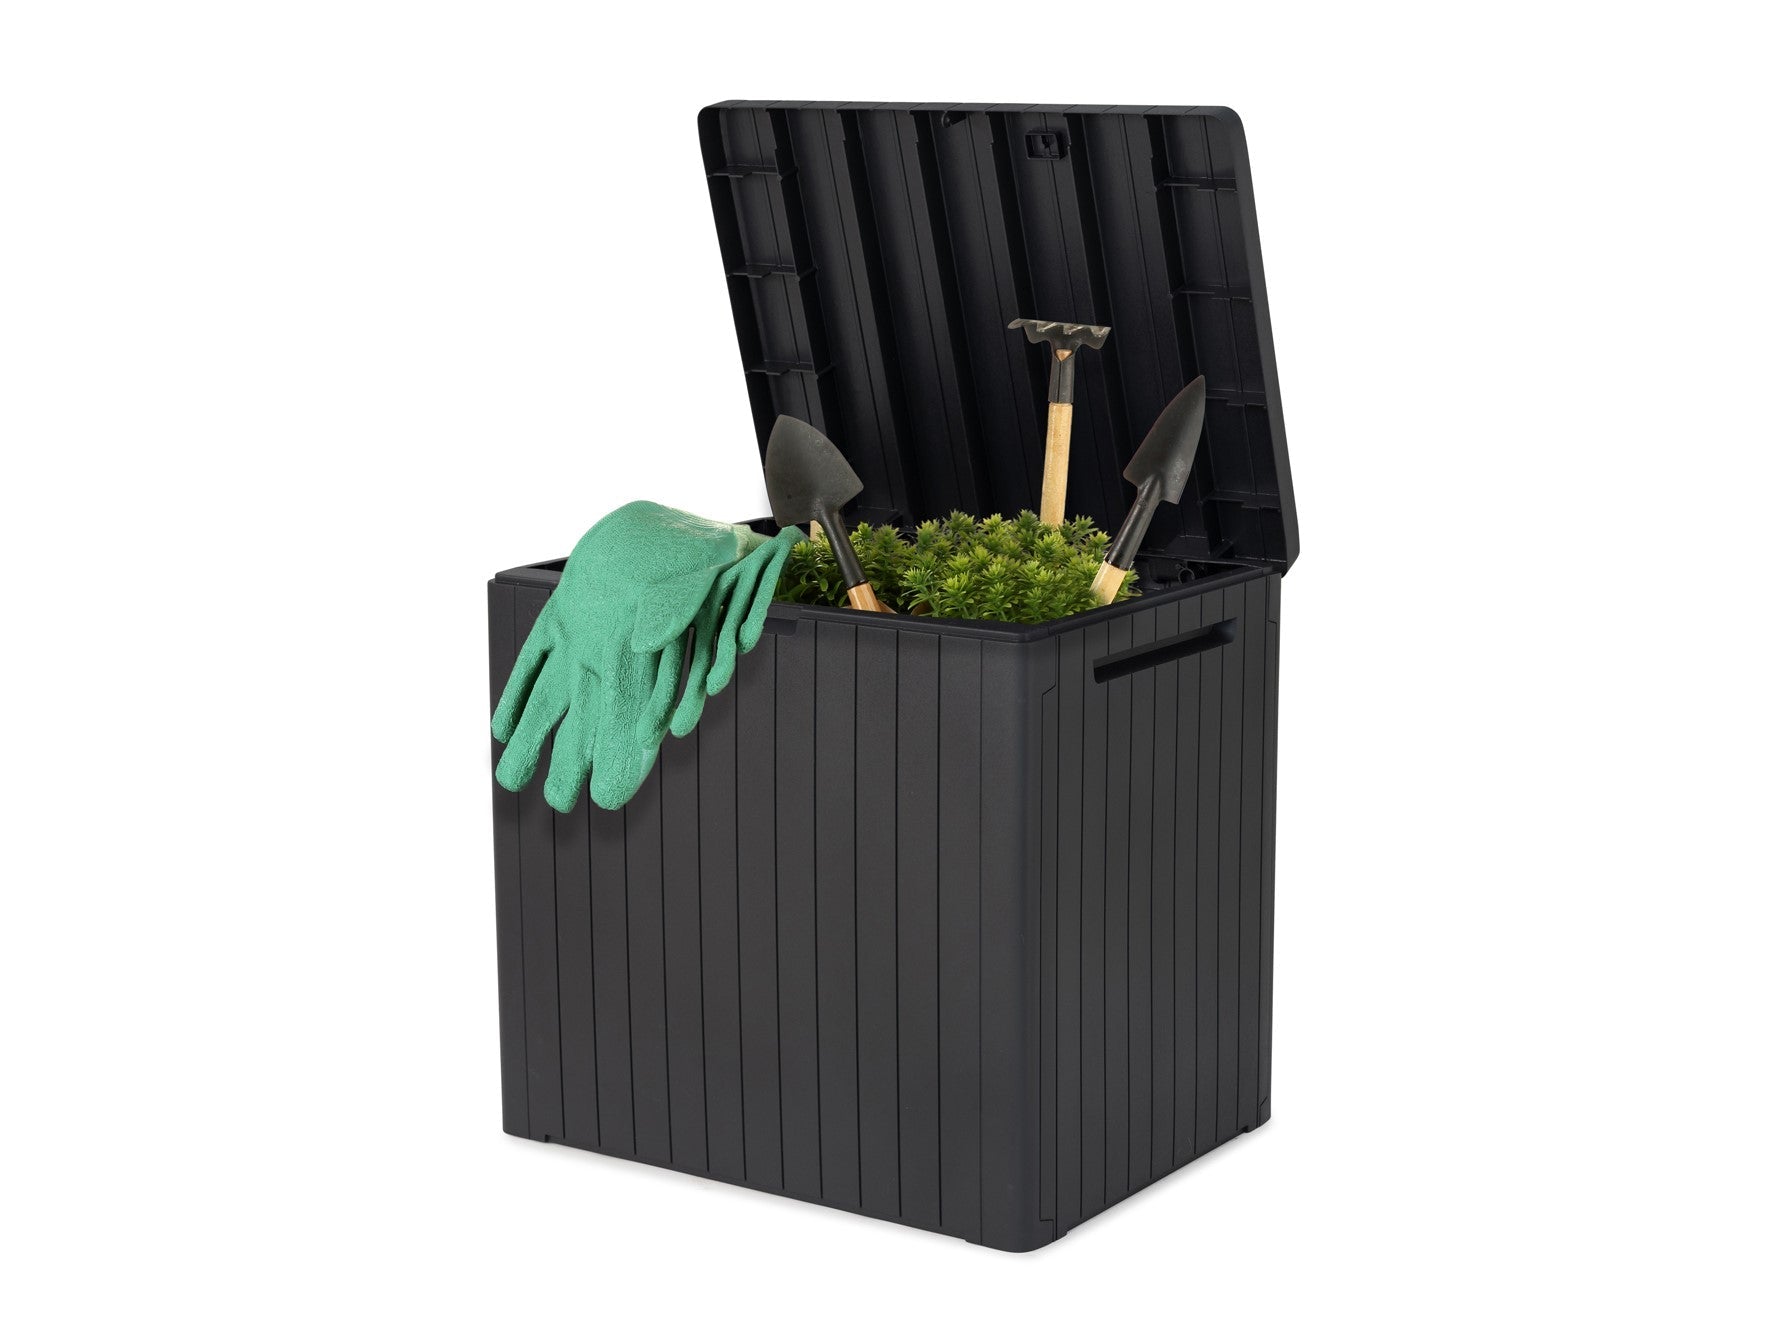 City Box clearcut with lid open showing gardening tools